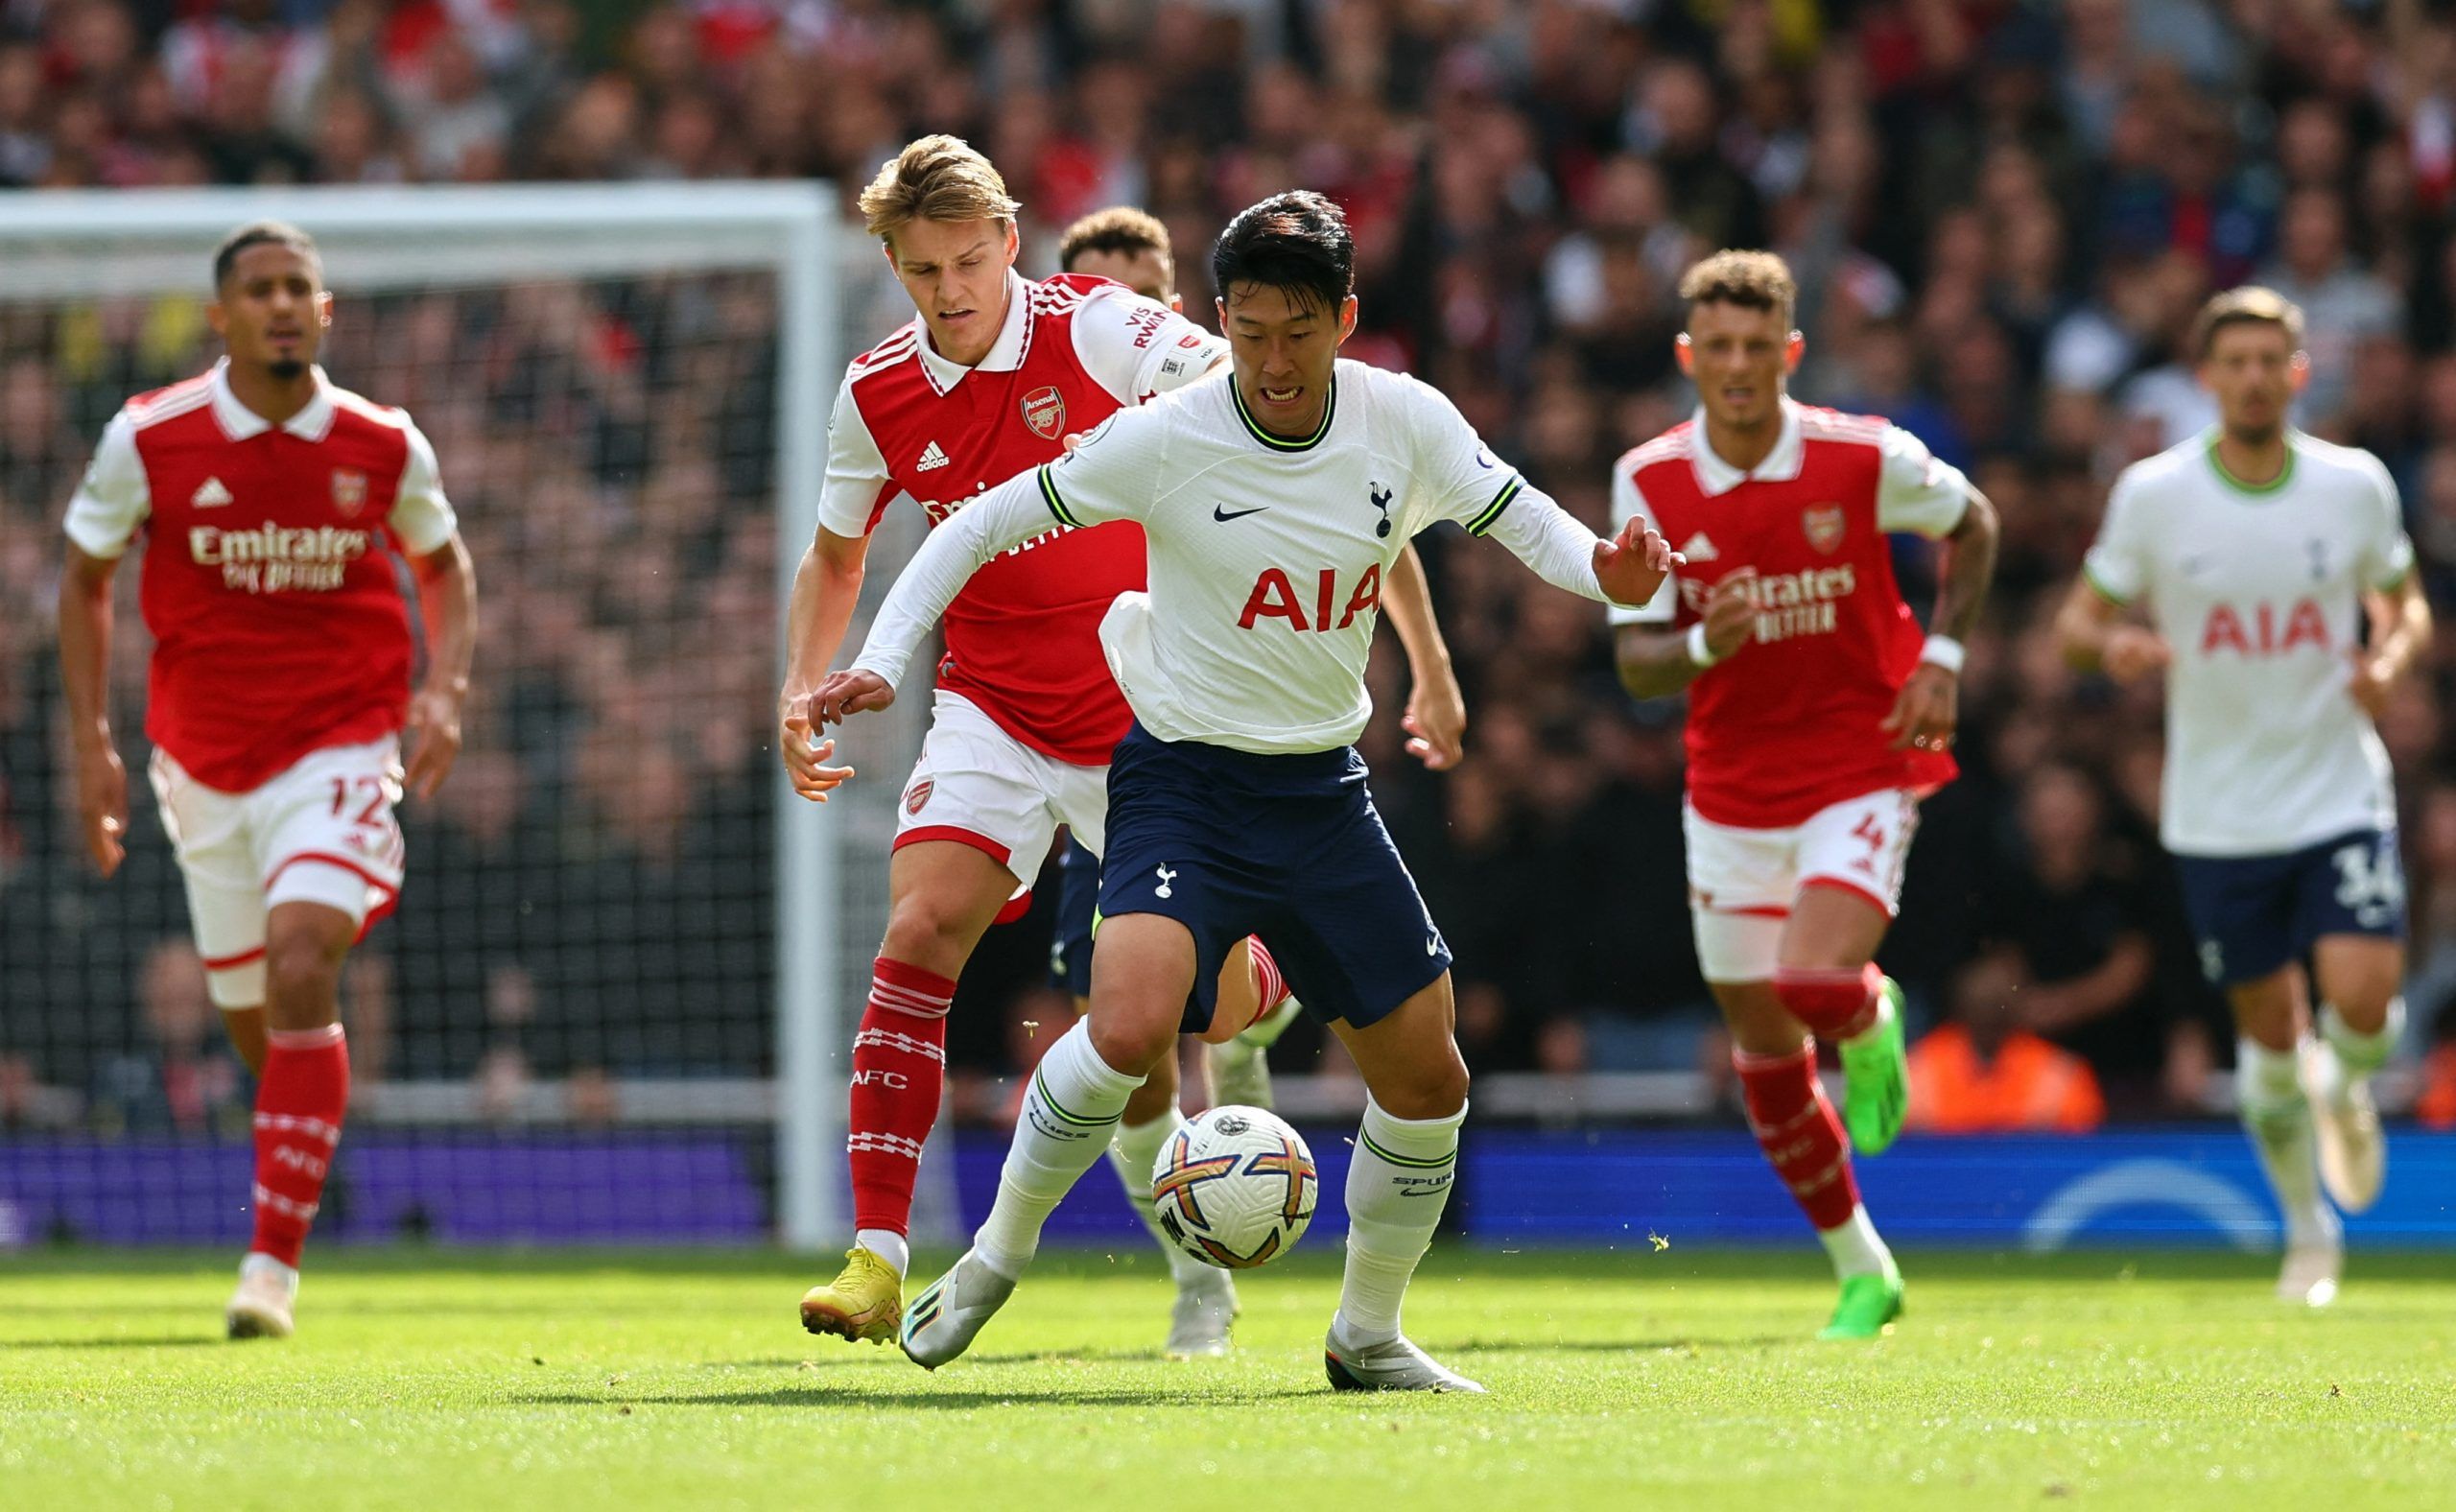 Tottenham Hotspur's Son Heung-min in action with Arsenal's Martin Odegaard